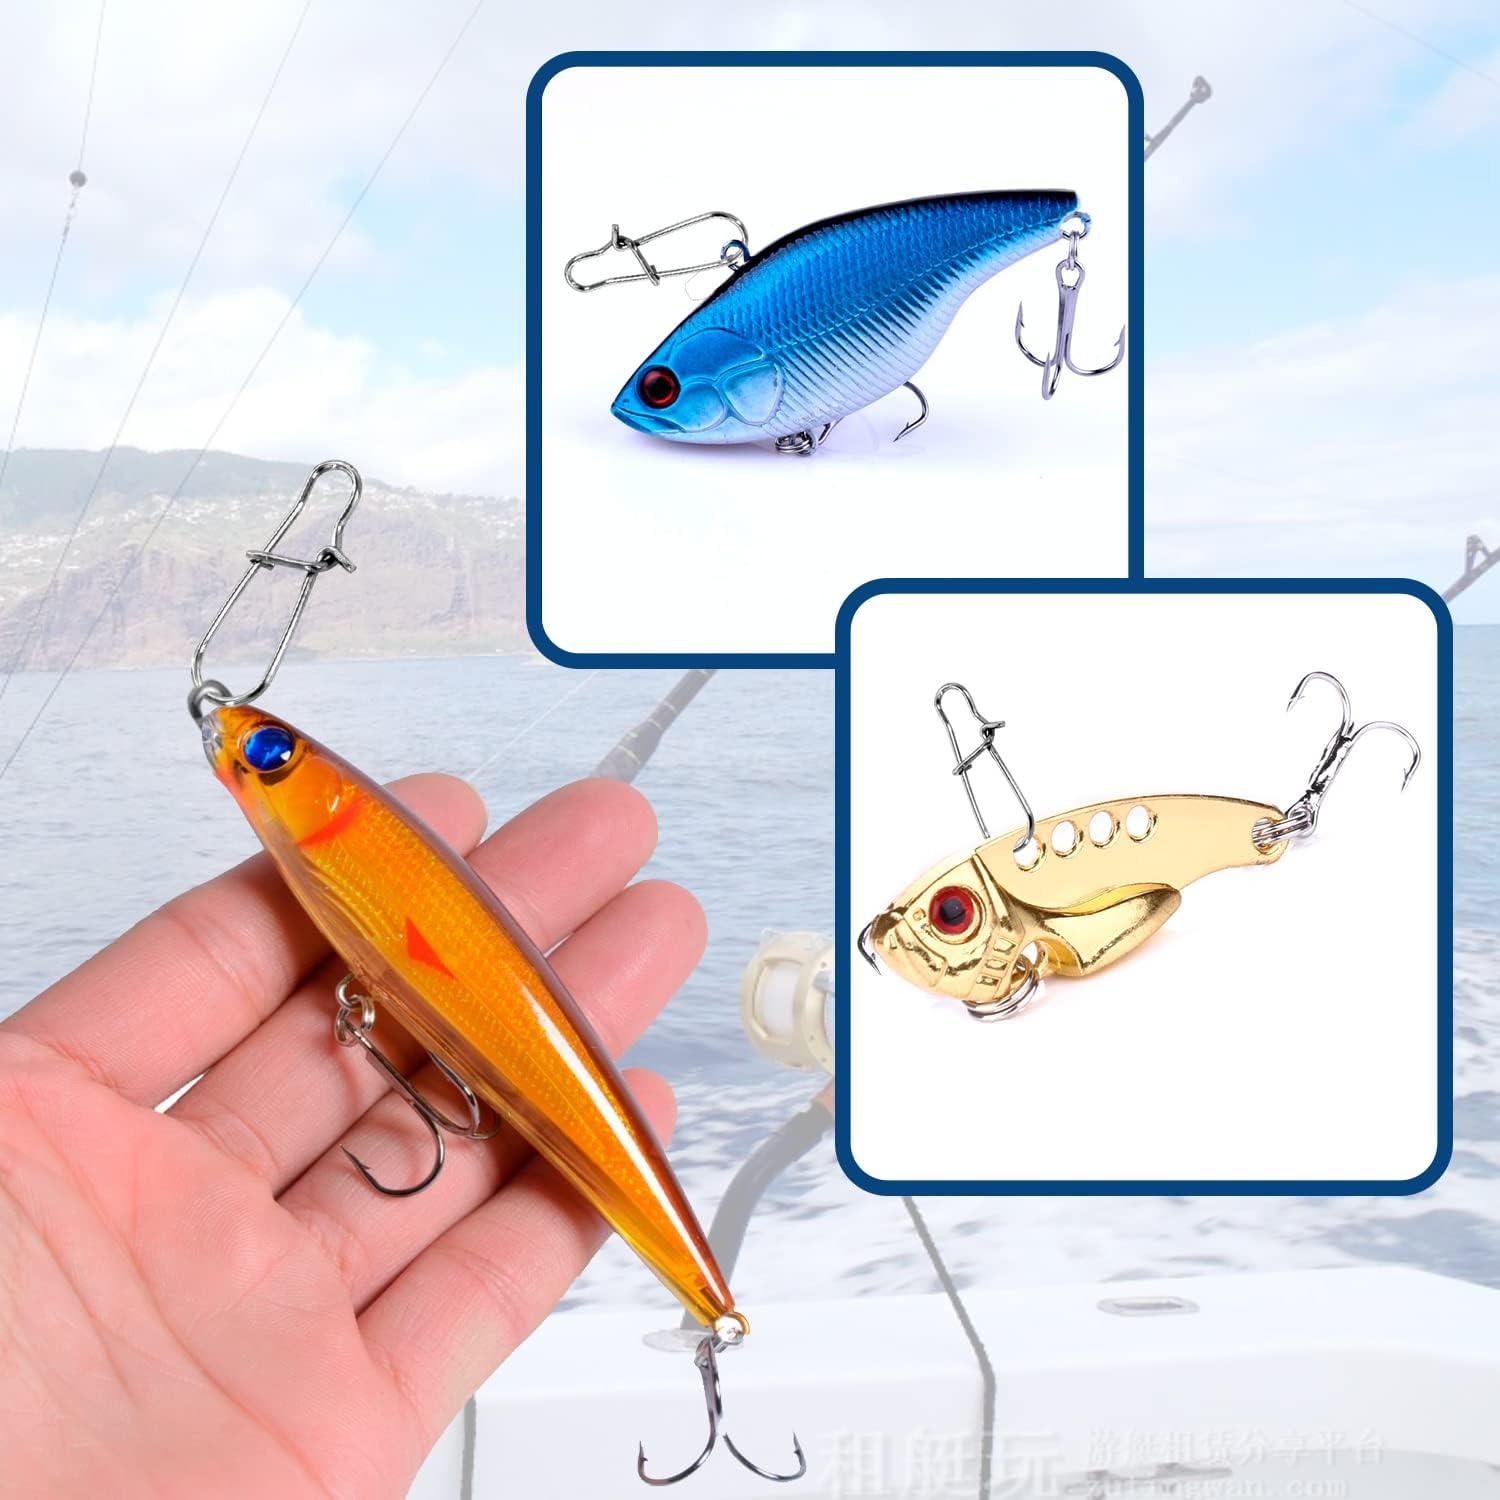 Demeras Closed Eye Fishing Clips Snap, Gourd Shaped Anti Long Line Clips  Snap for Freshwater for Surf Fishing(1.8 * 60MM) : Sports & Outdoors 